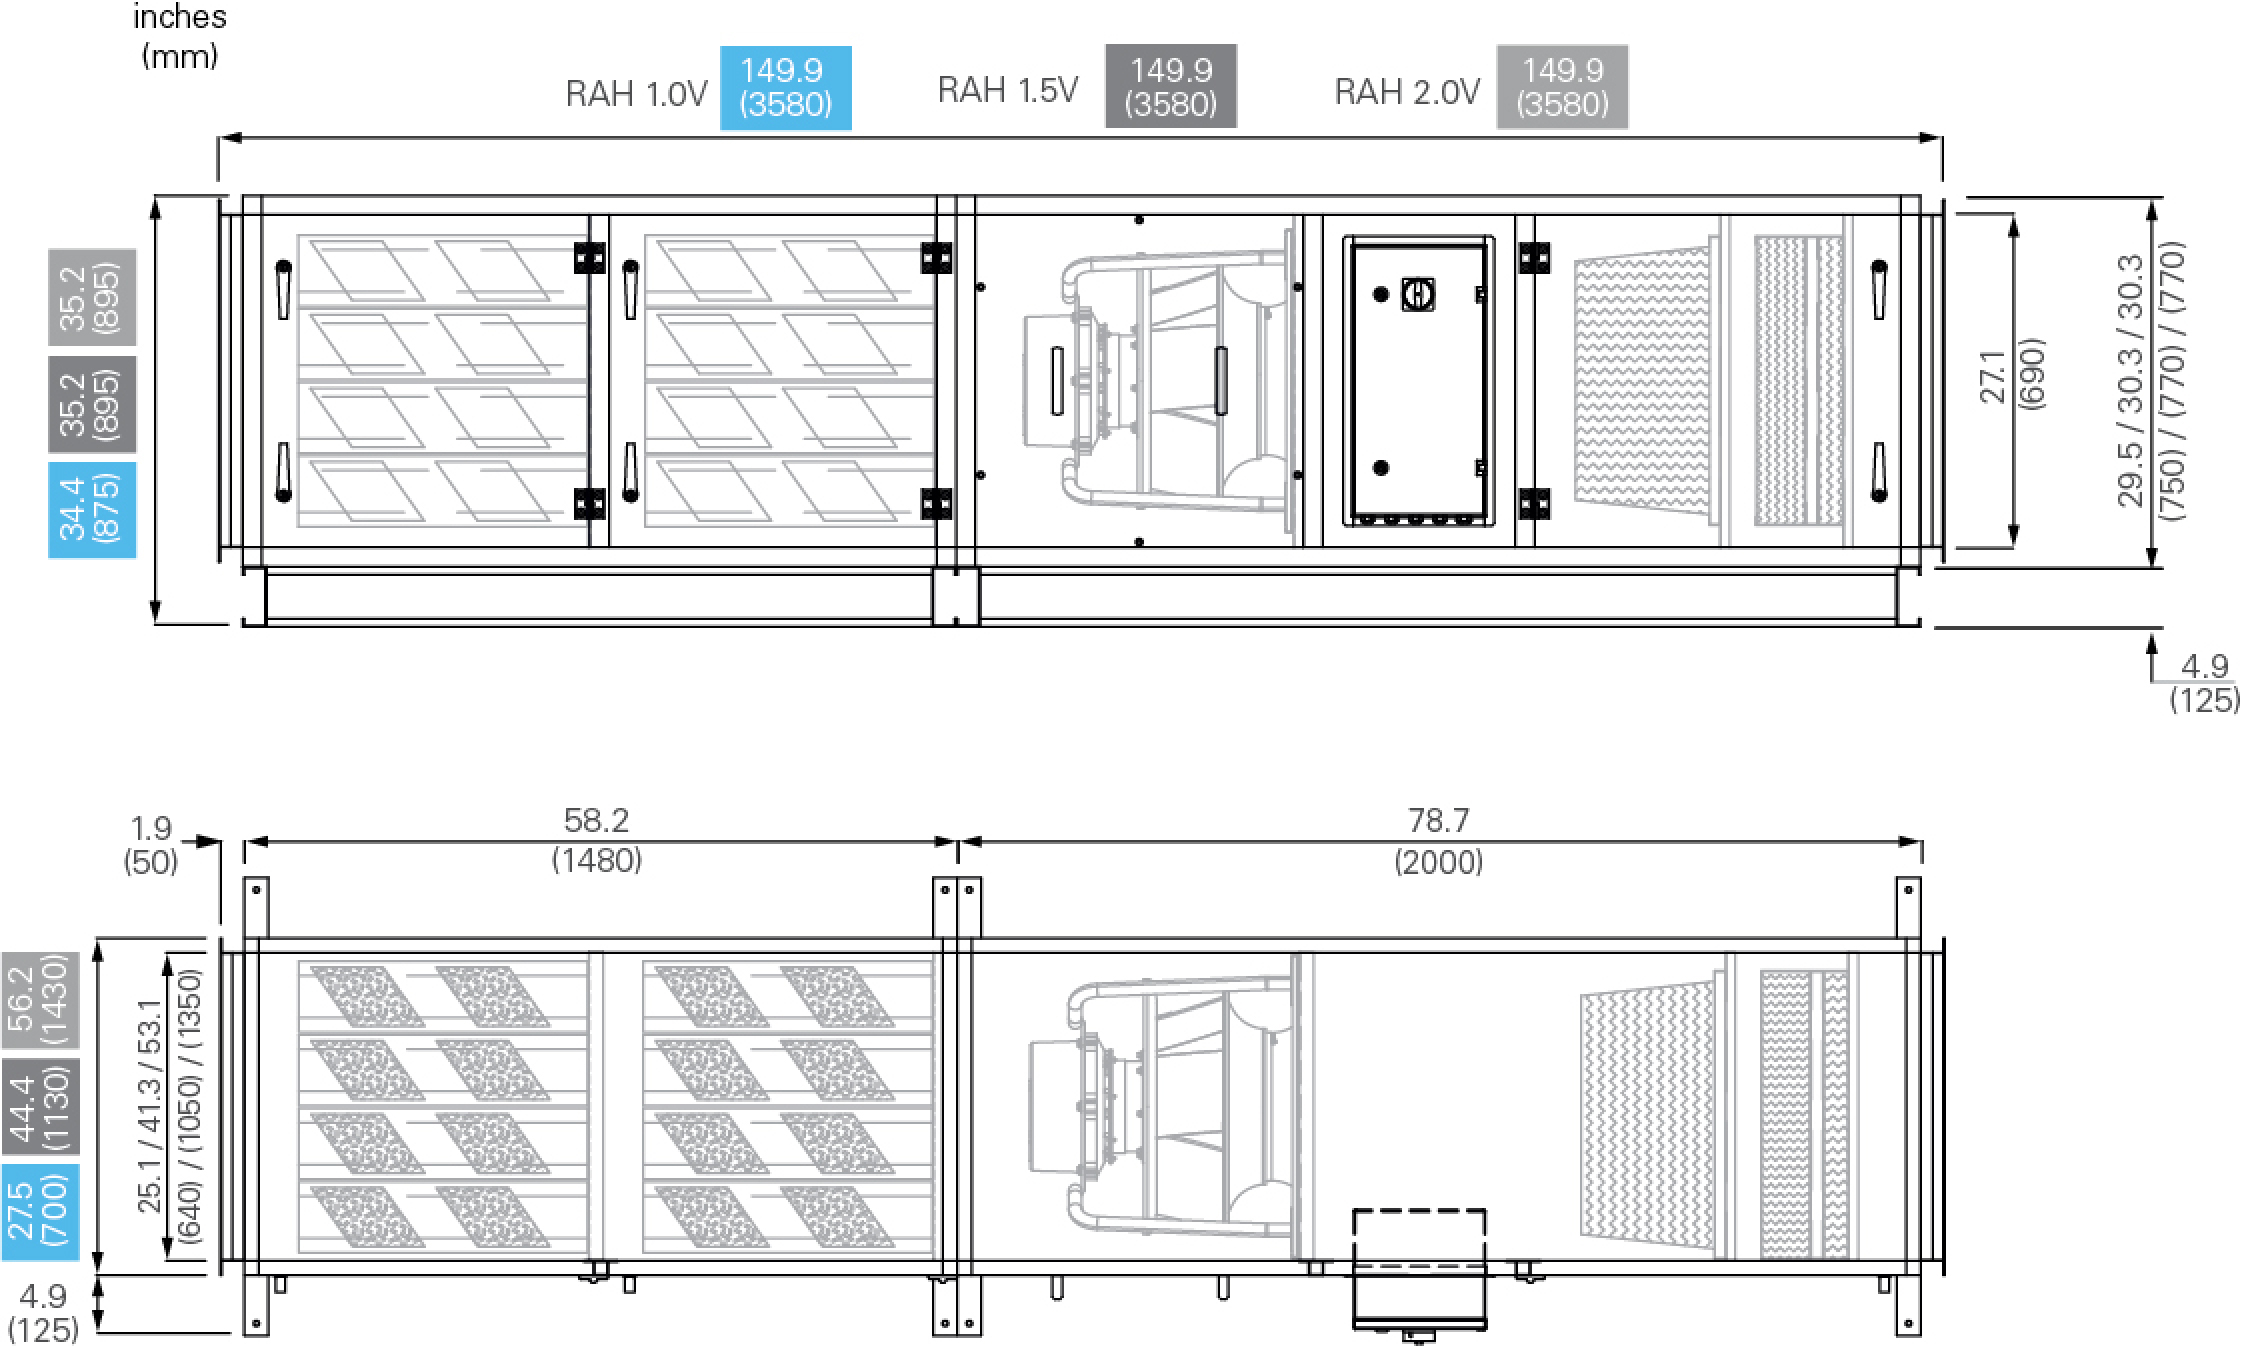 Dimensions for RecoAir by Halton Ceiling Mount recirculating kitchen extract unit